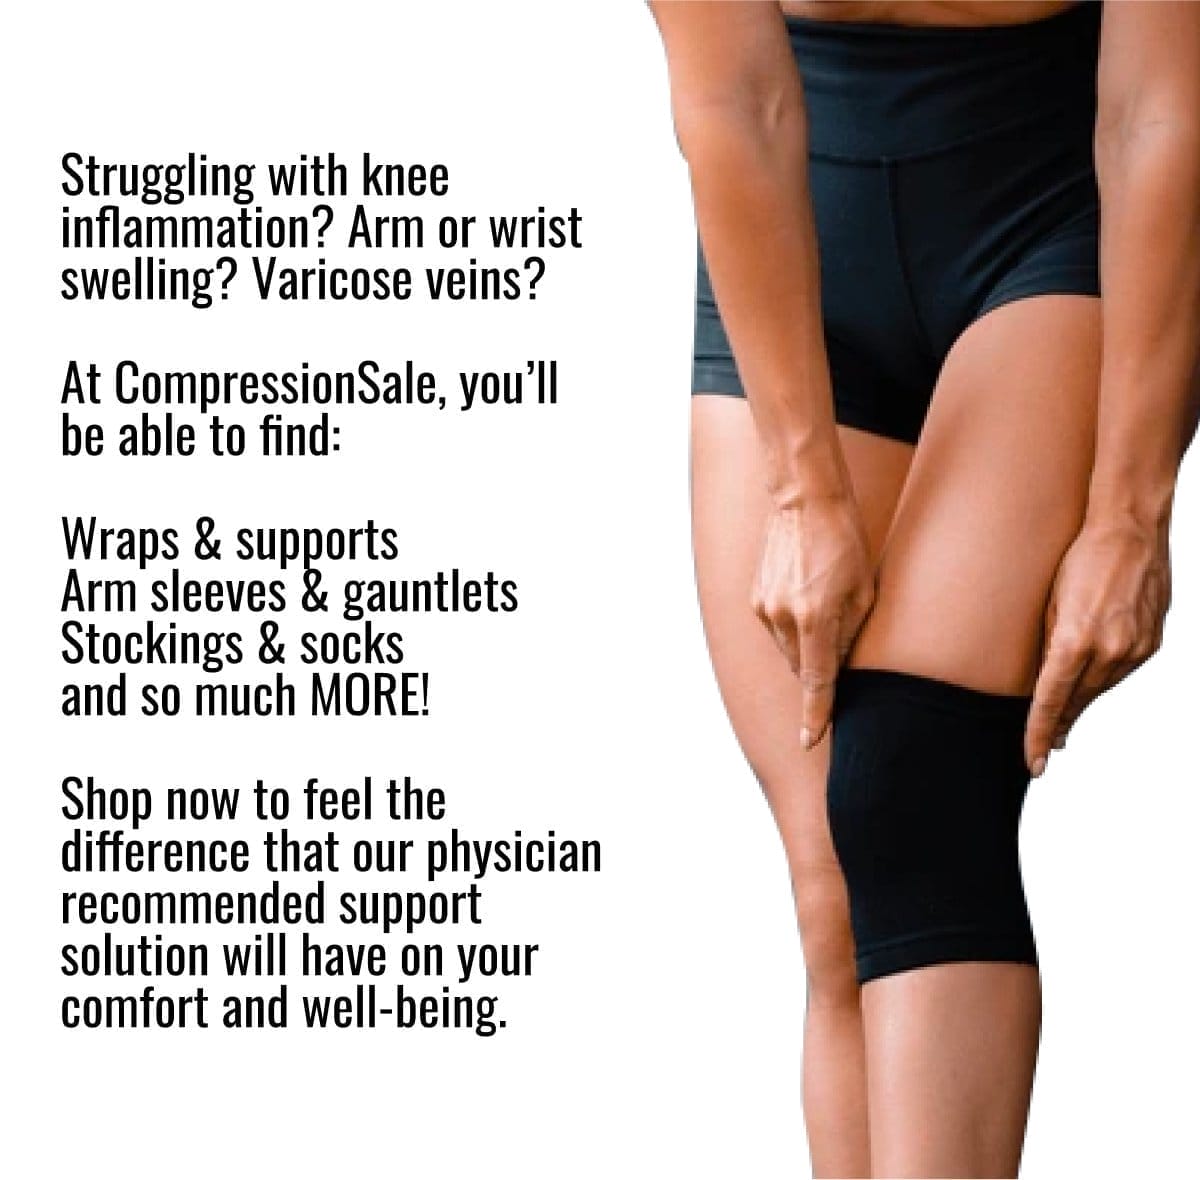 Struggling with knee inflammation? Arm or wrist swelling? Varicose veins? At CompressionSale, you’ll be able to find: Wraps & supports Arm sleeves & gauntlets Stockings & socks and so much MORE! Shop now to feel the difference that our physician recommended support solution will have on your comfort and well-being.